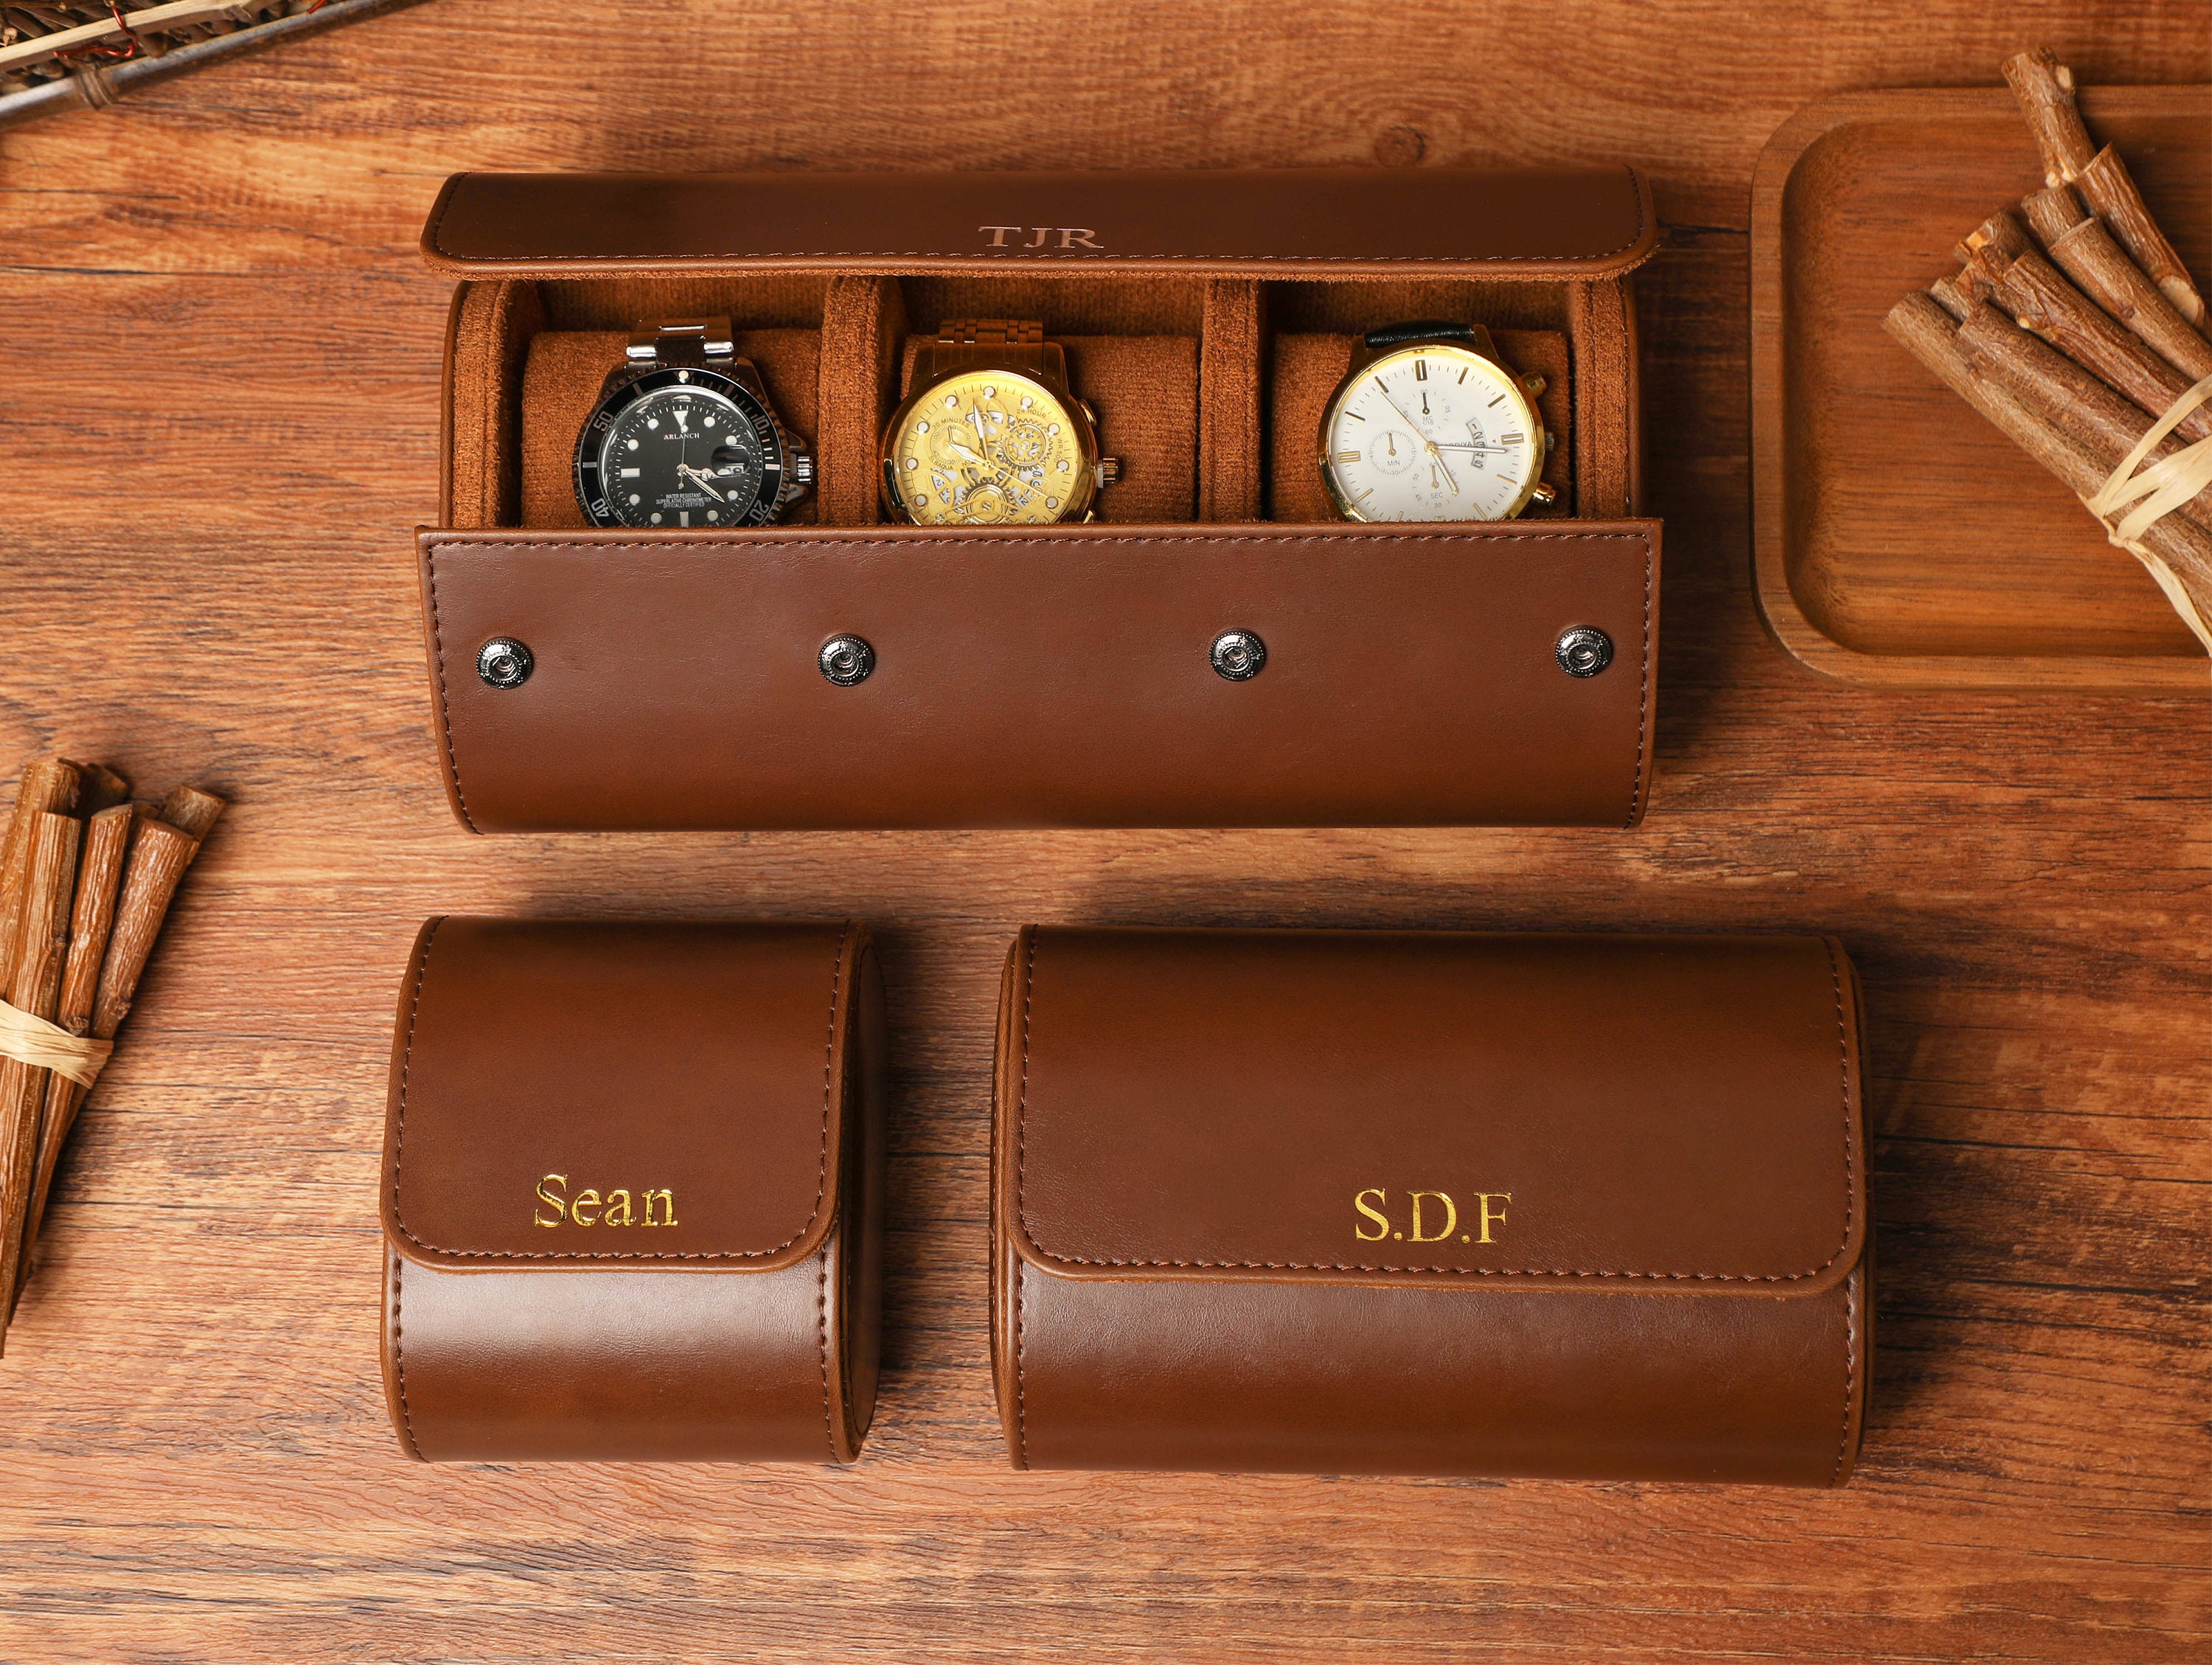  Watch Roll Travel Case - Handmade Leather Watch Rolls Box for  Man - Travel Watch Roll with Velvet to Protection - Watch Roll Organizer to  Home Secure Storage（3 slot brown） 